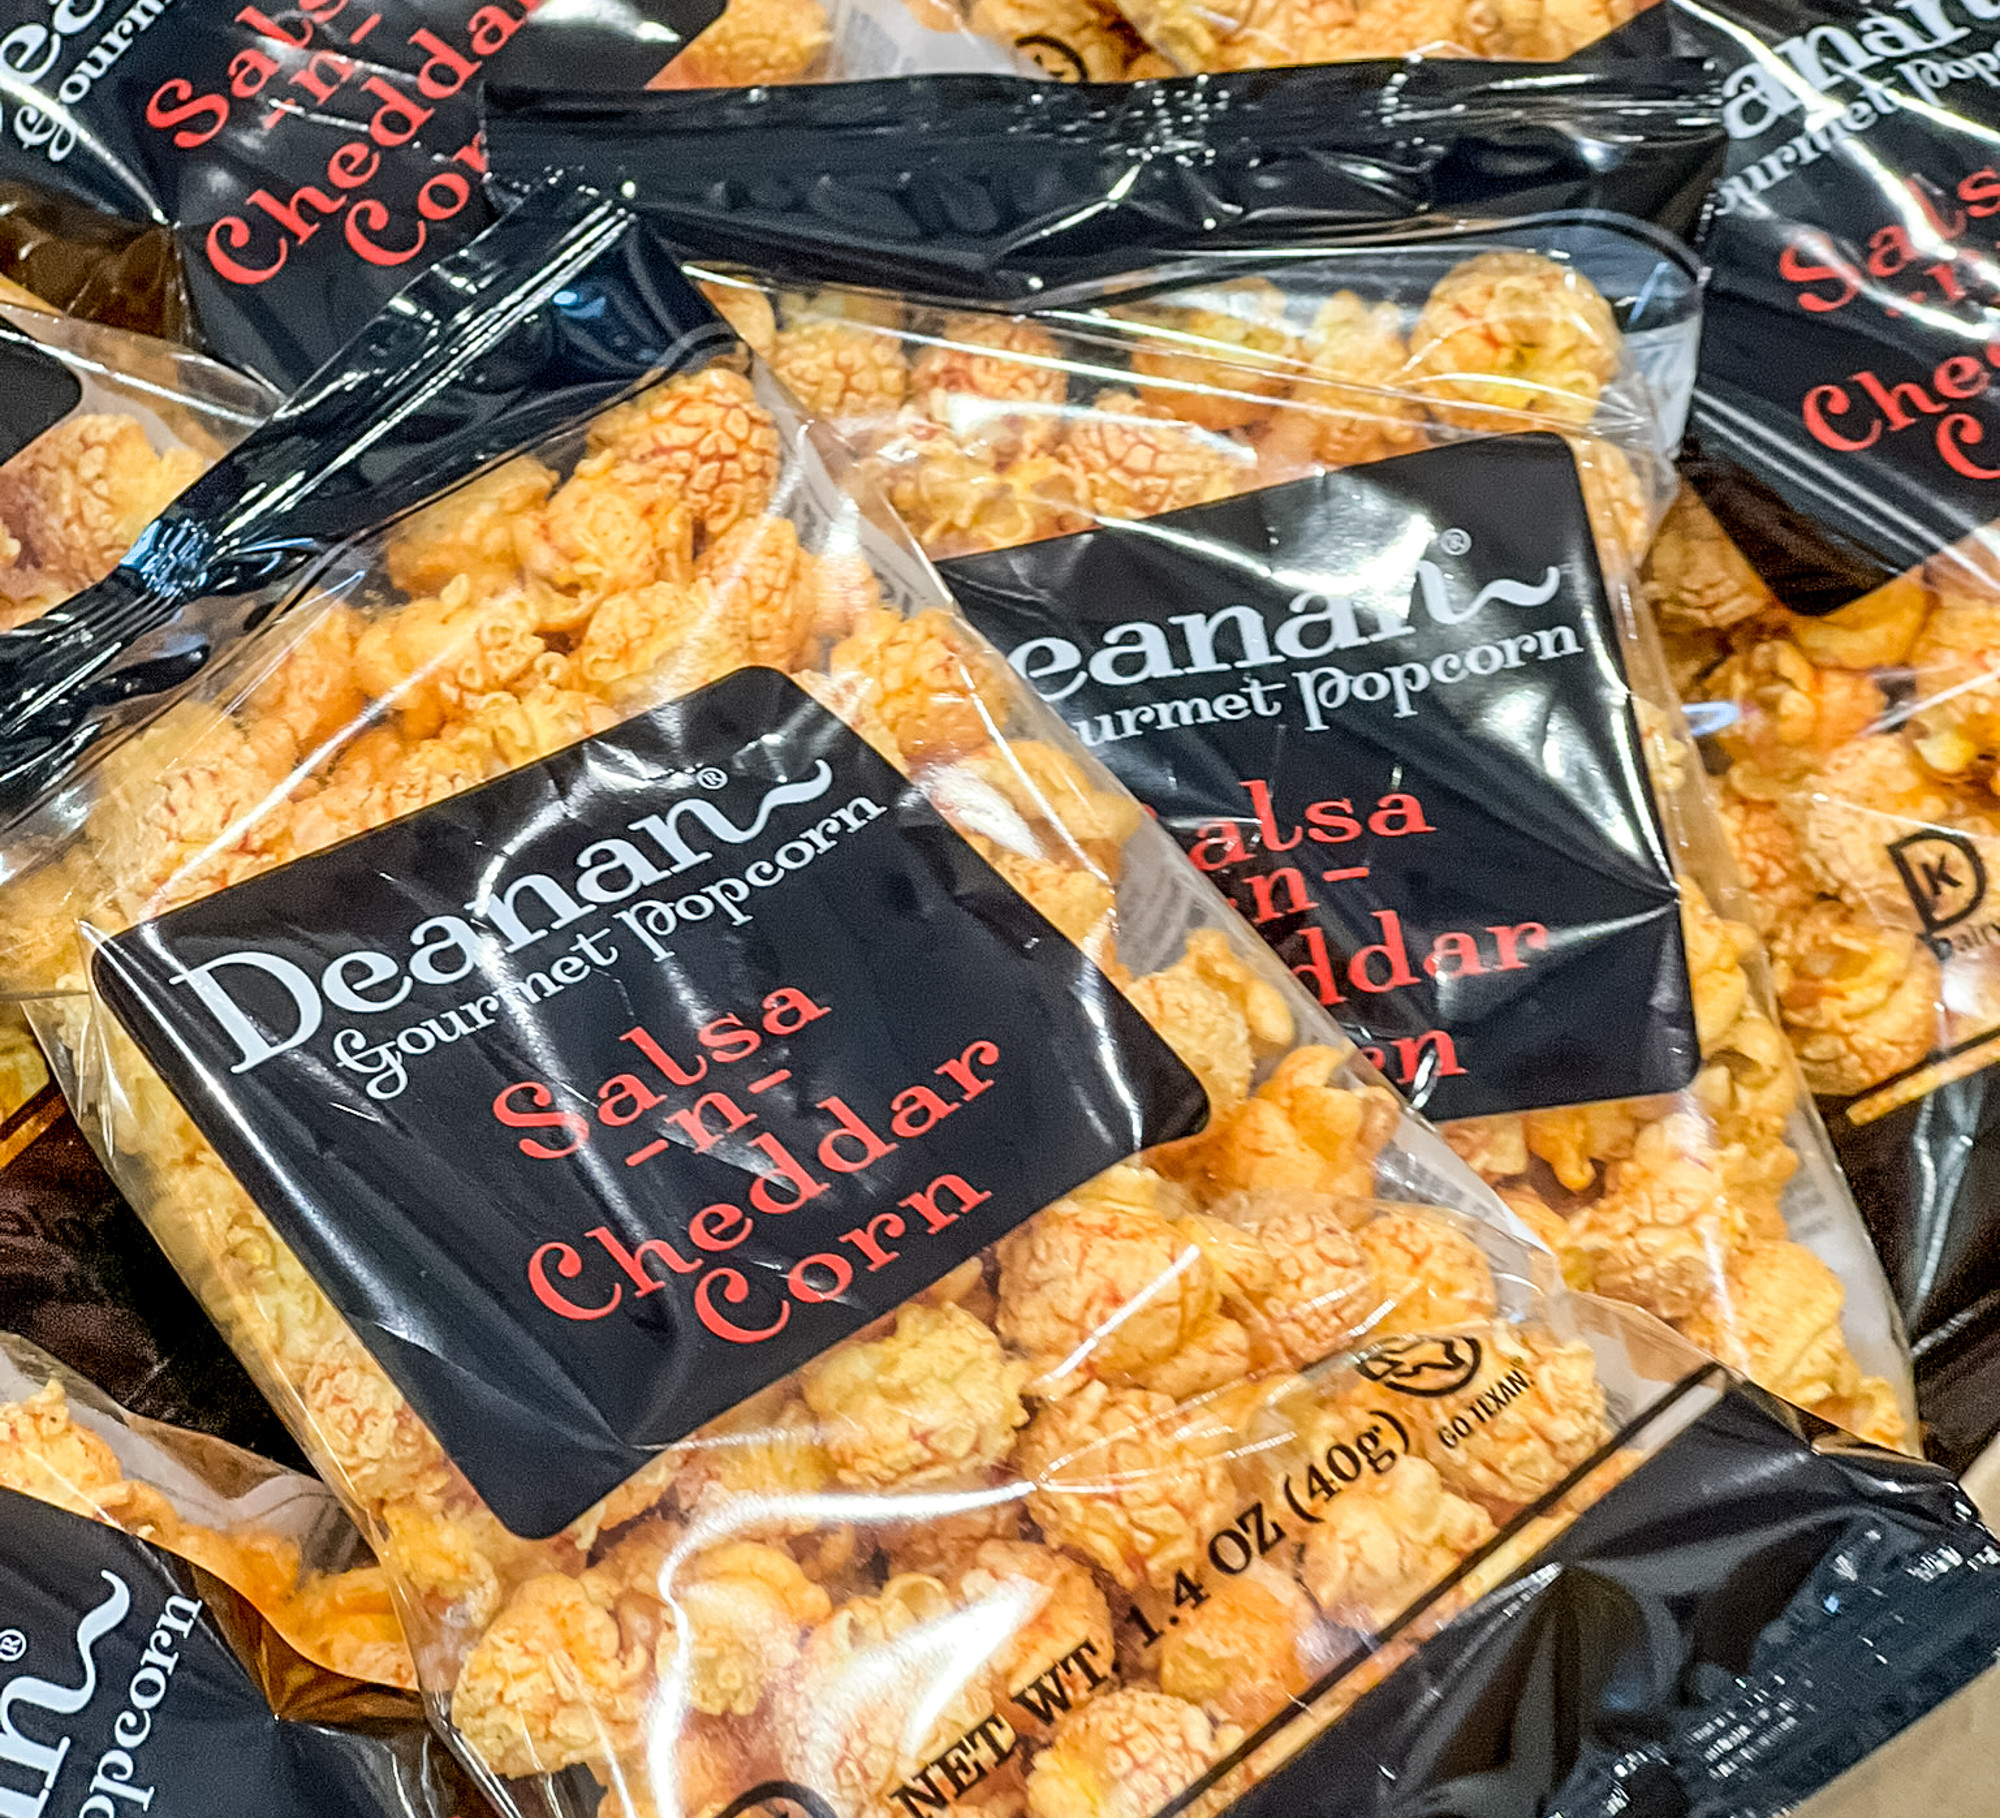 Deanan Salsa N Cheddar Corn packaged and ready for shipping